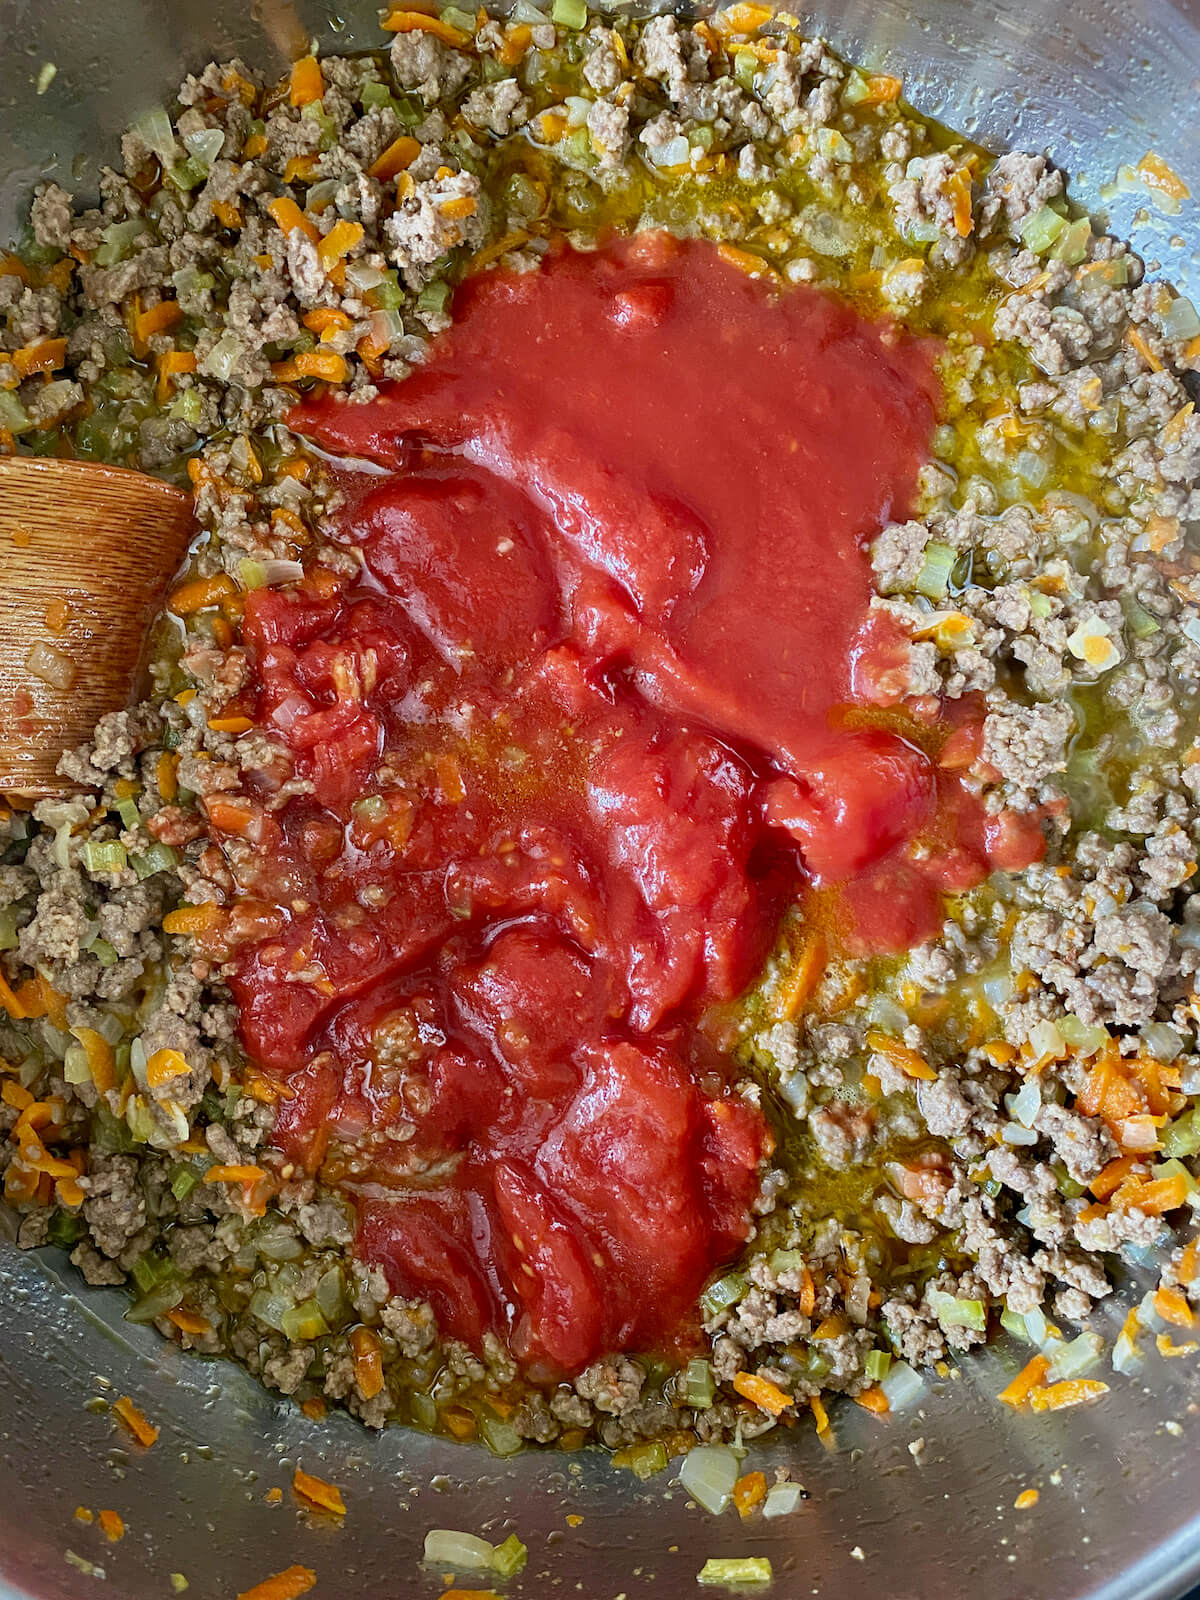 Whole peeled San Marzano tomatoes added to the ground beef mixture.